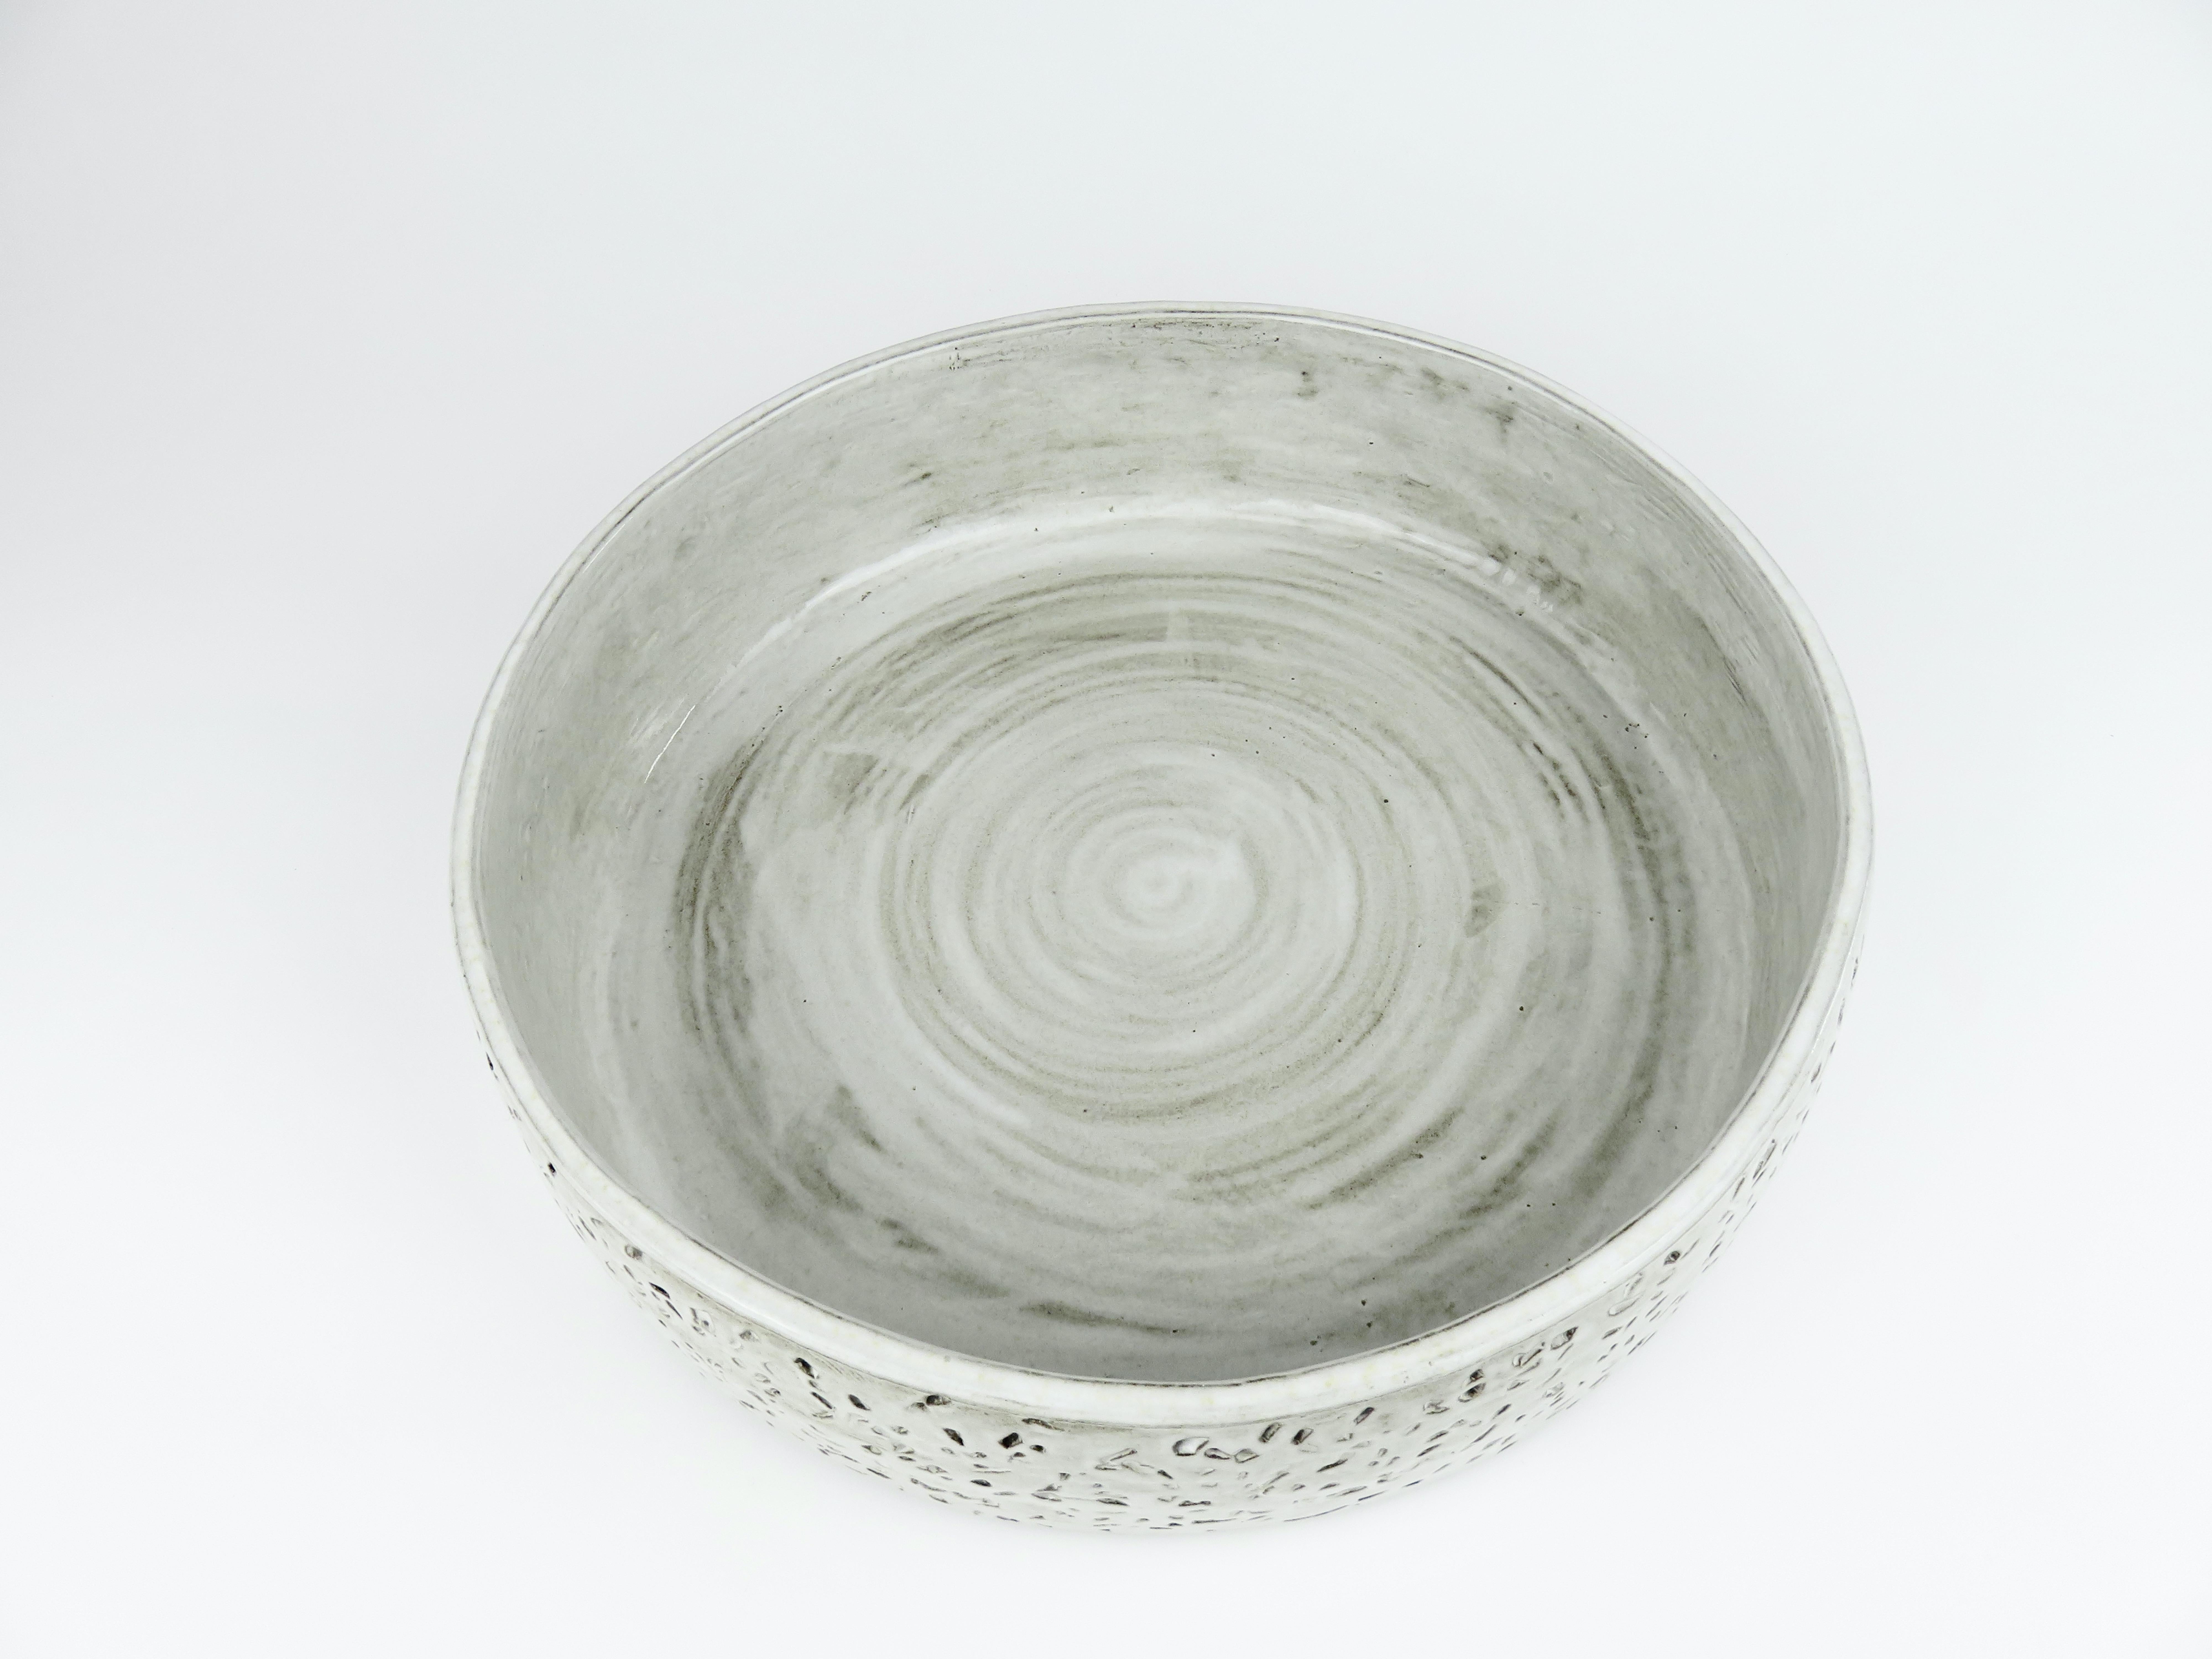 Large Flat Serving Bowl, Hand Carved Exterior In Off-White Glaze, Ceramic In New Condition For Sale In New York, NY